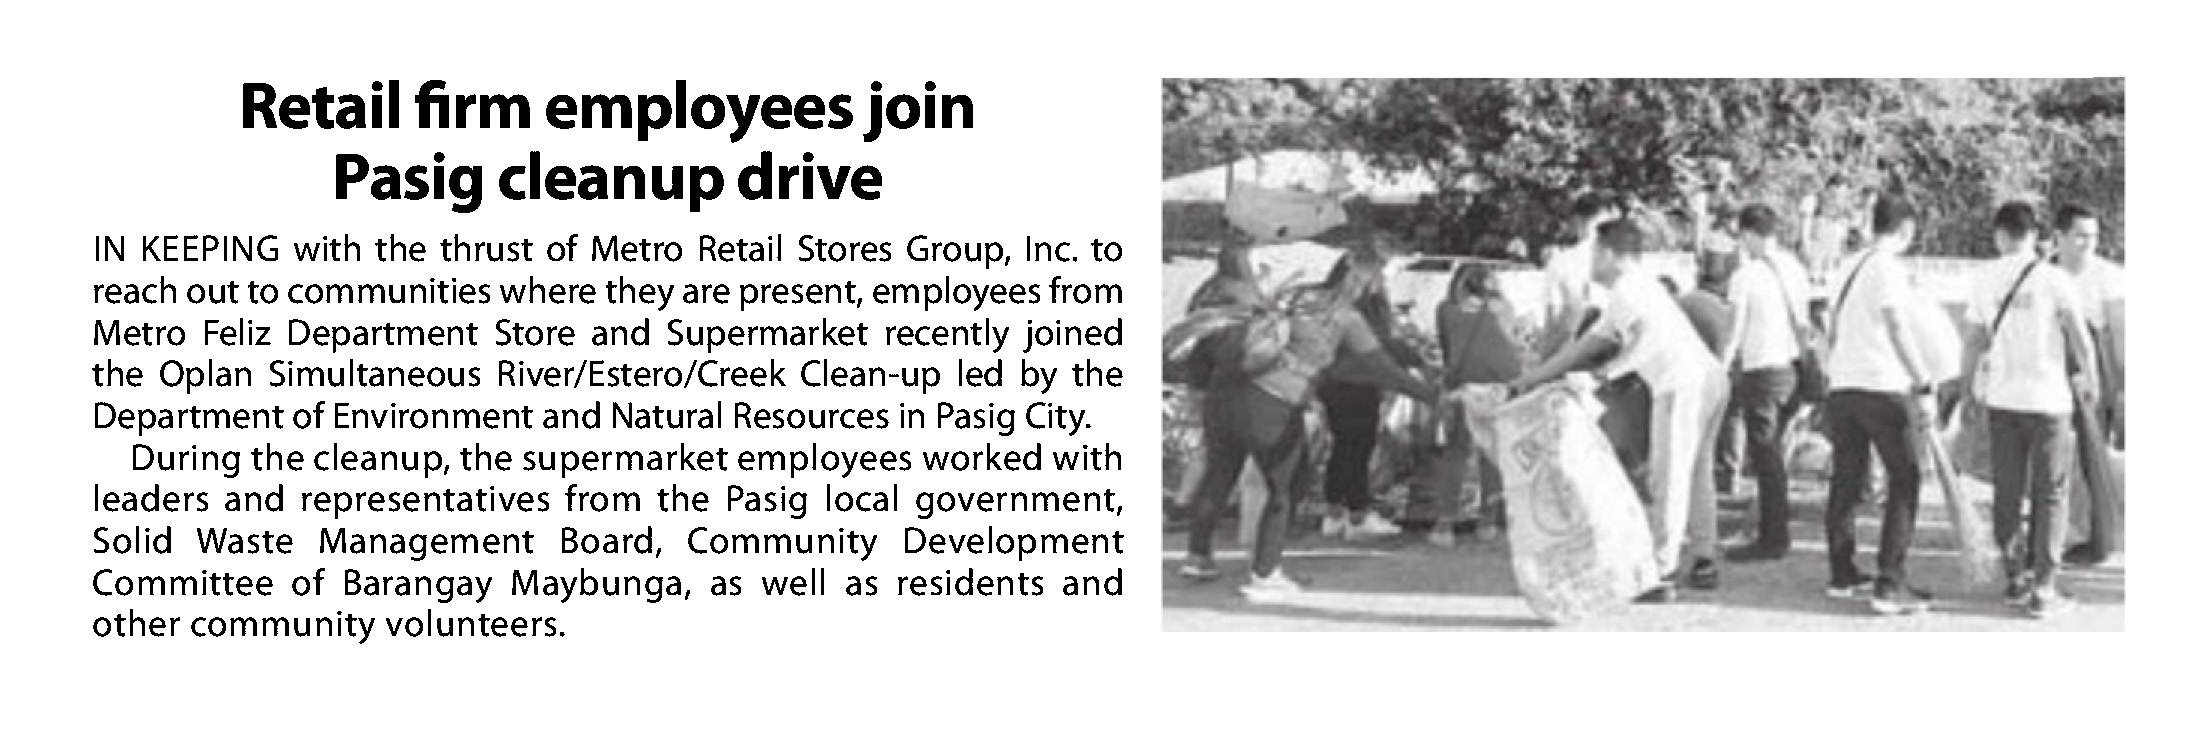 Retail firm employees join Pasig cleanup drive Manila Standard Today